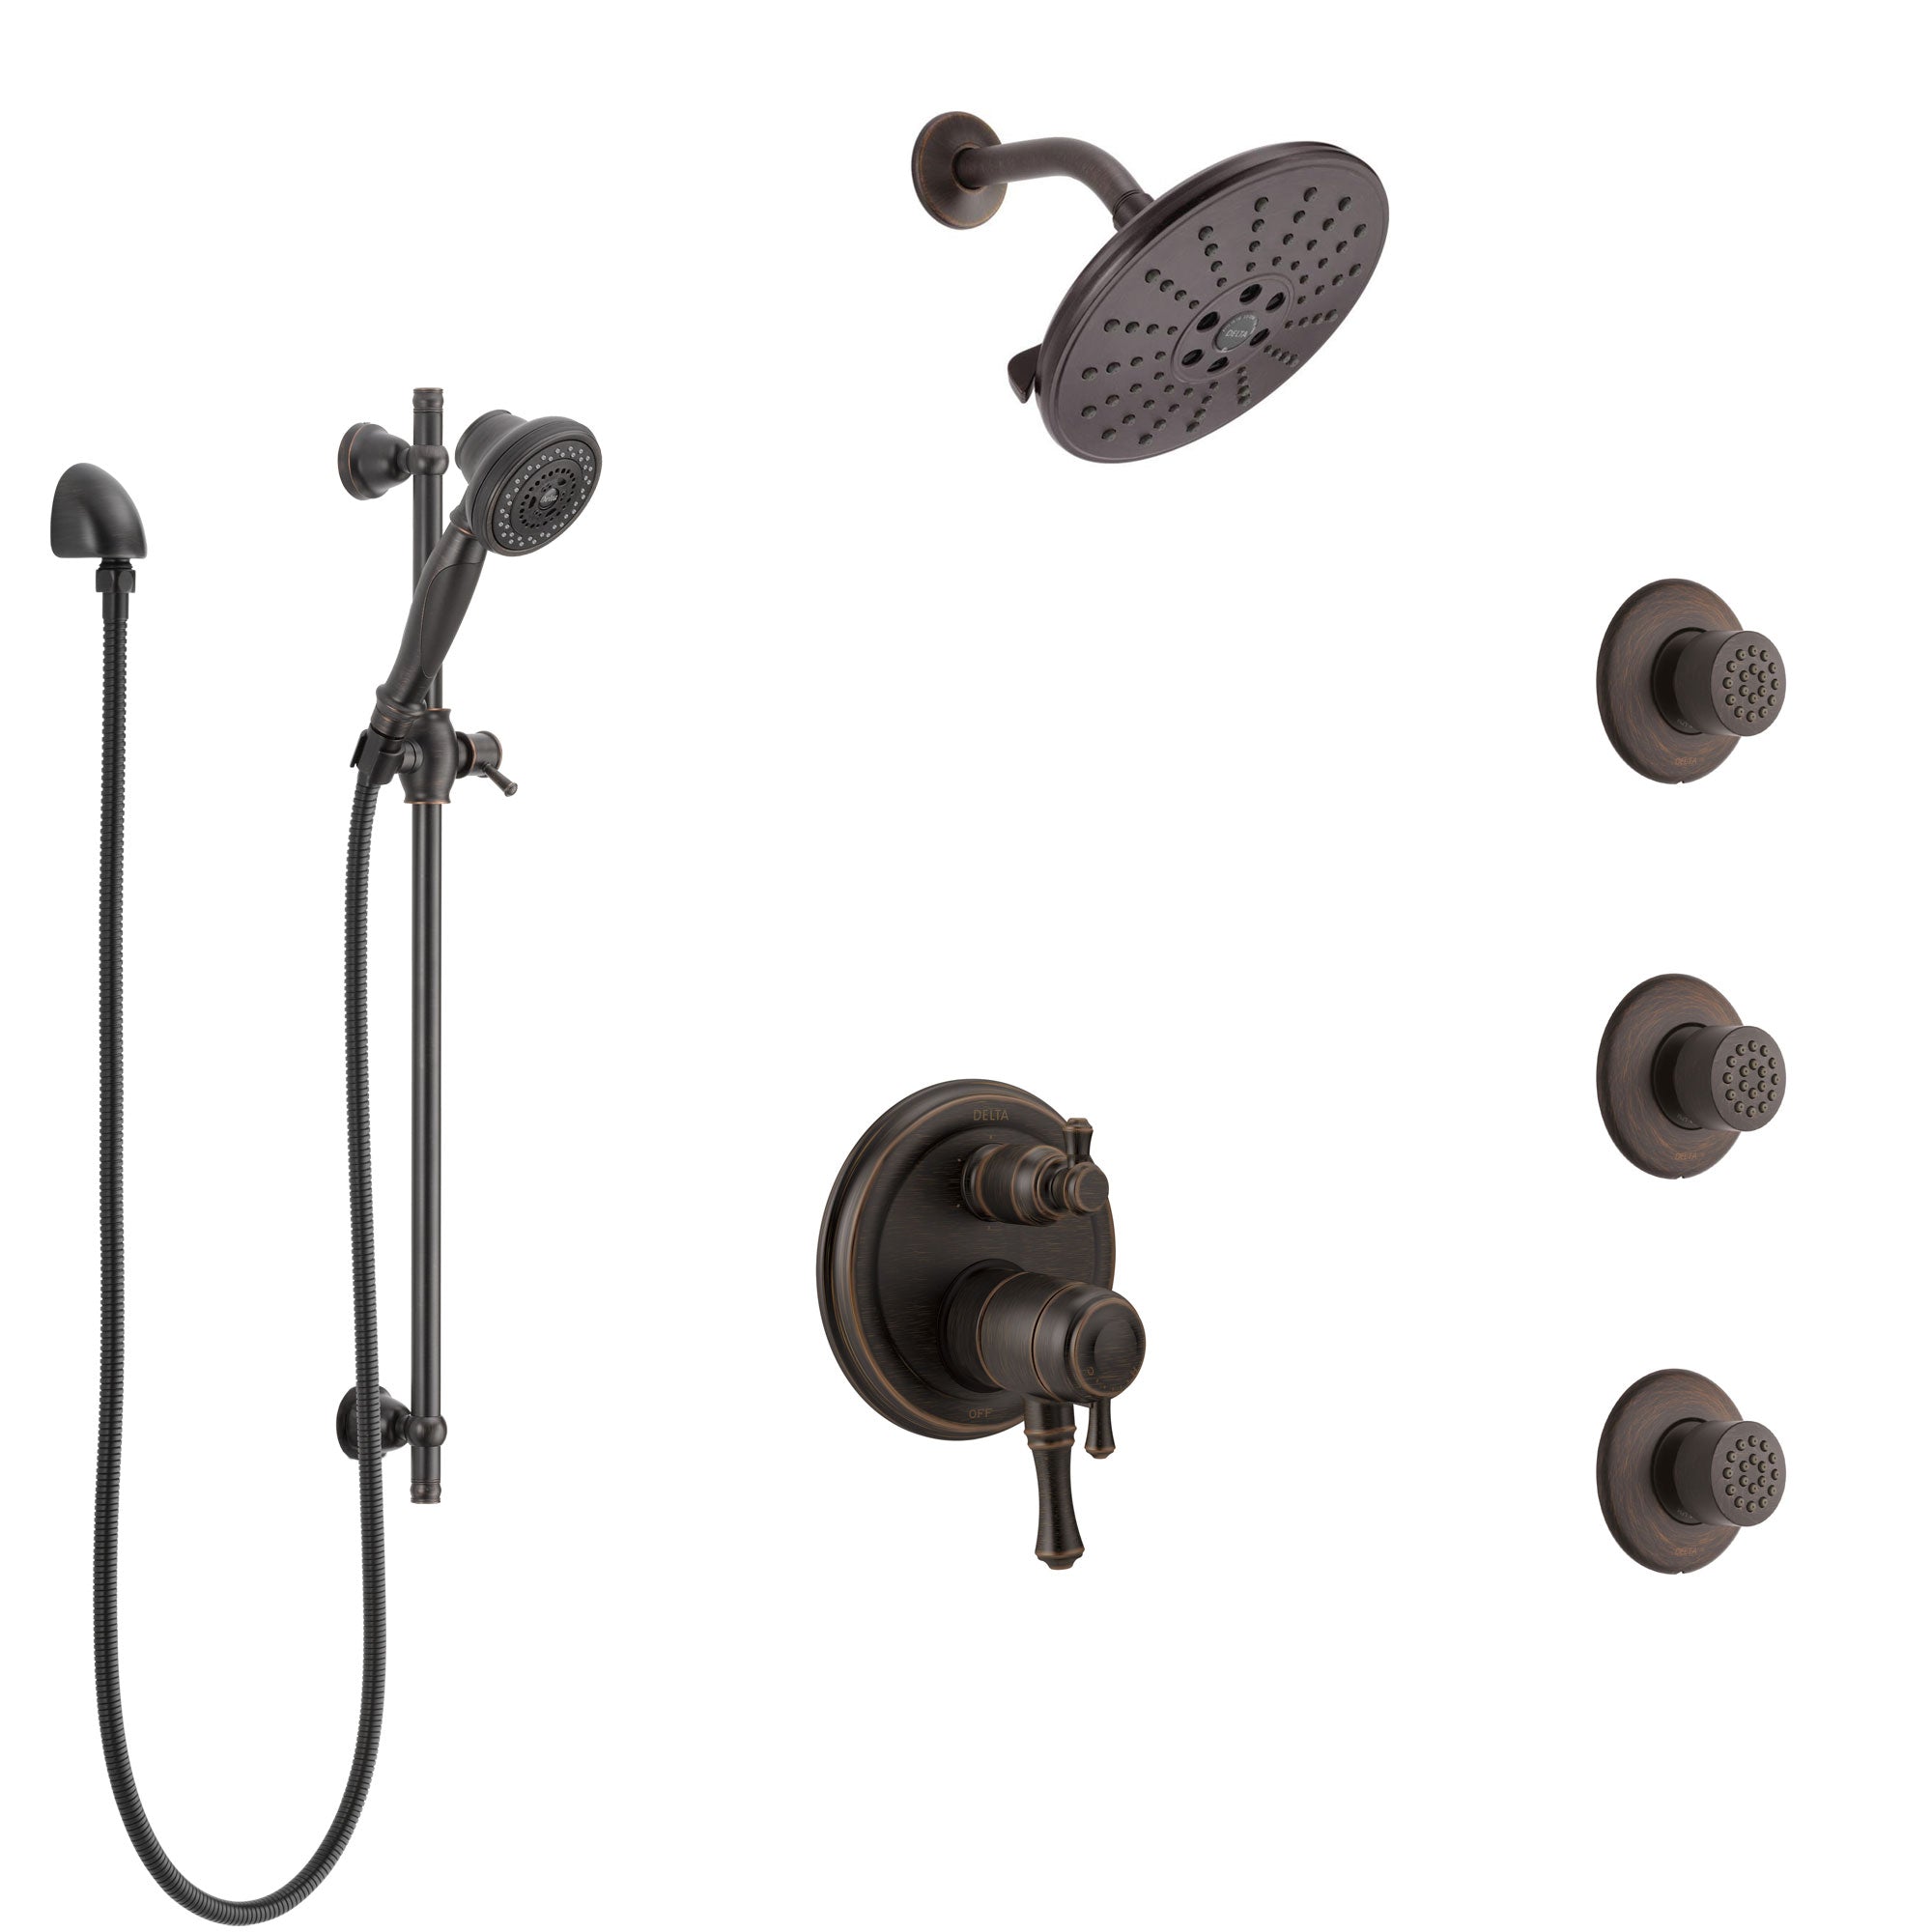 Delta Cassidy Venetian Bronze Shower System with Dual Control Handle, Integrated Diverter, Showerhead, 3 Body Sprays, and Hand Shower SS27997RB6